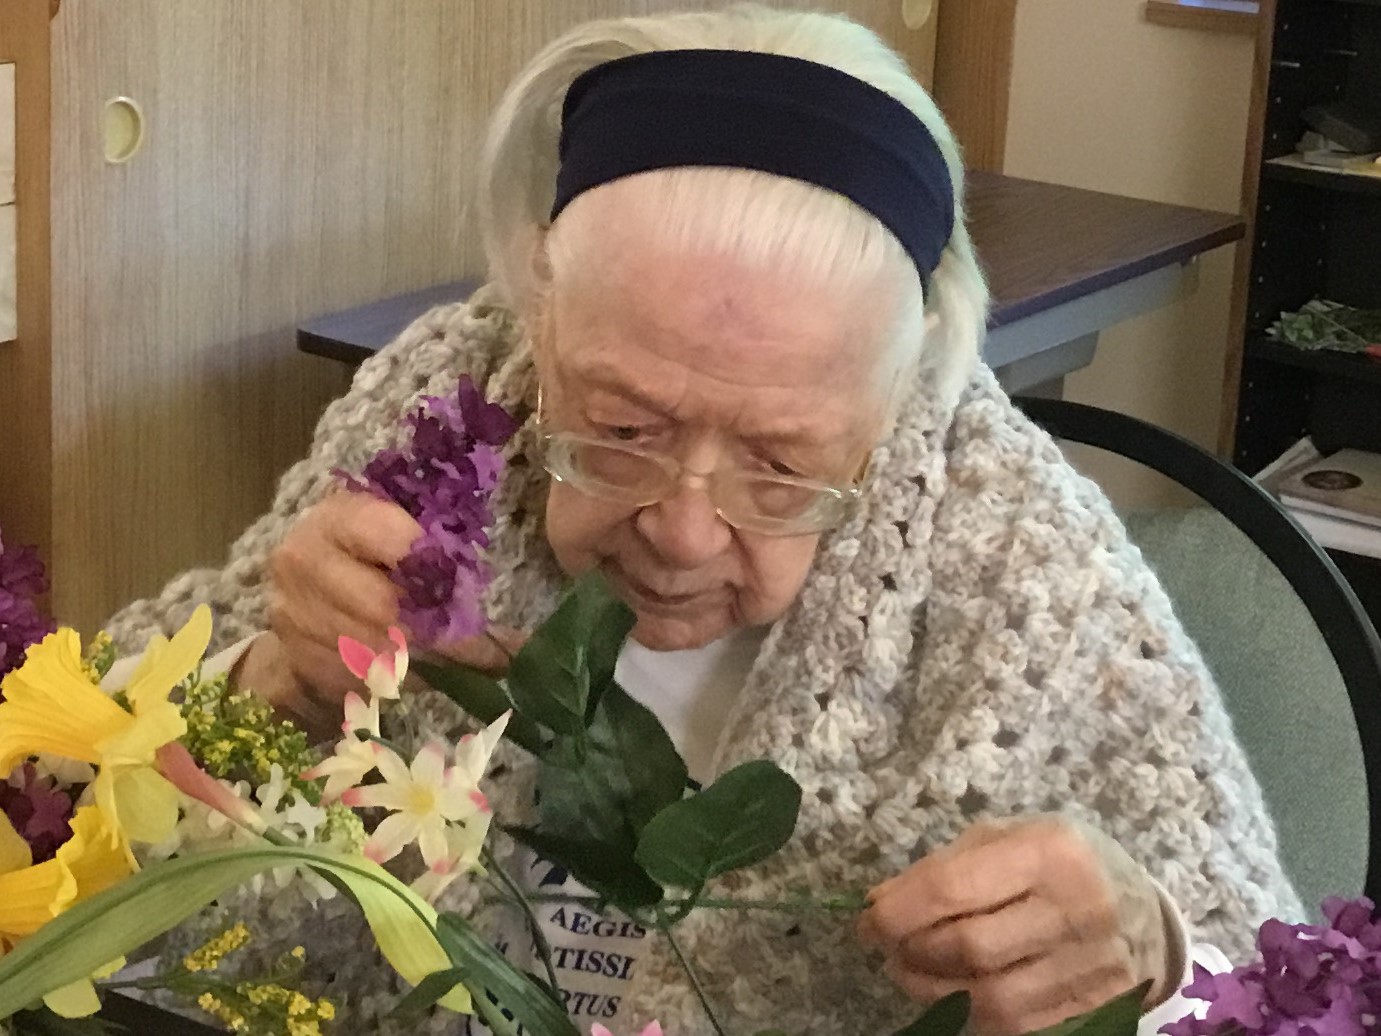 Photo of a Dementia patient admiring her gift of flowers